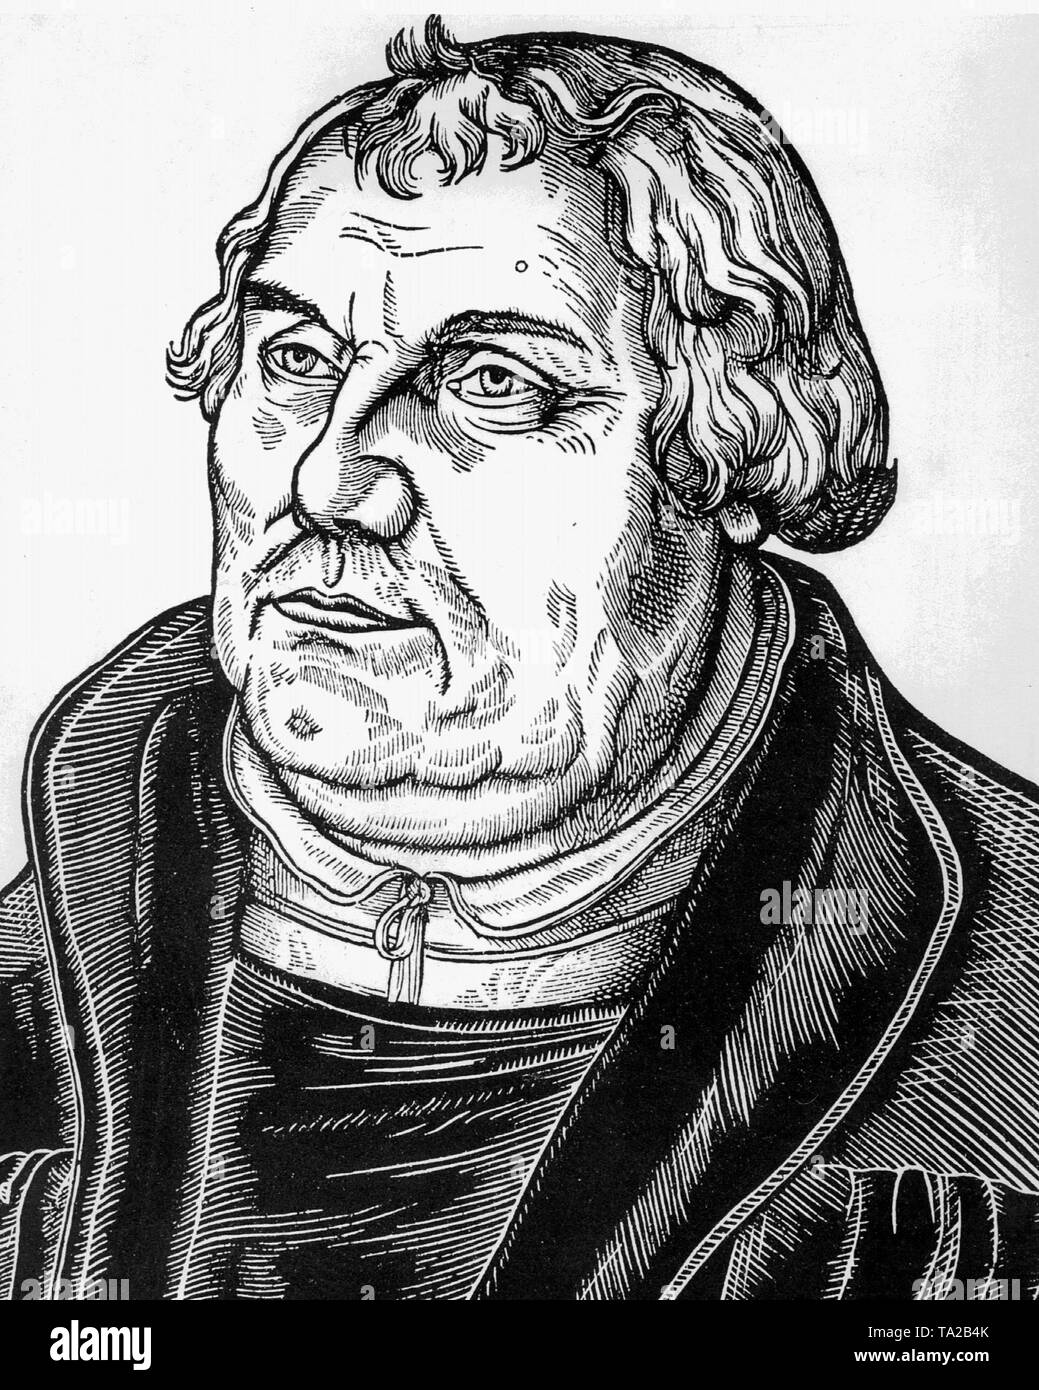 Martin Luther (1483-1546), Protestant reformer. Woodcut image of Luther by Lucas Cranach, the Older, which comes closest to his true appearance in his elder years. Stock Photo